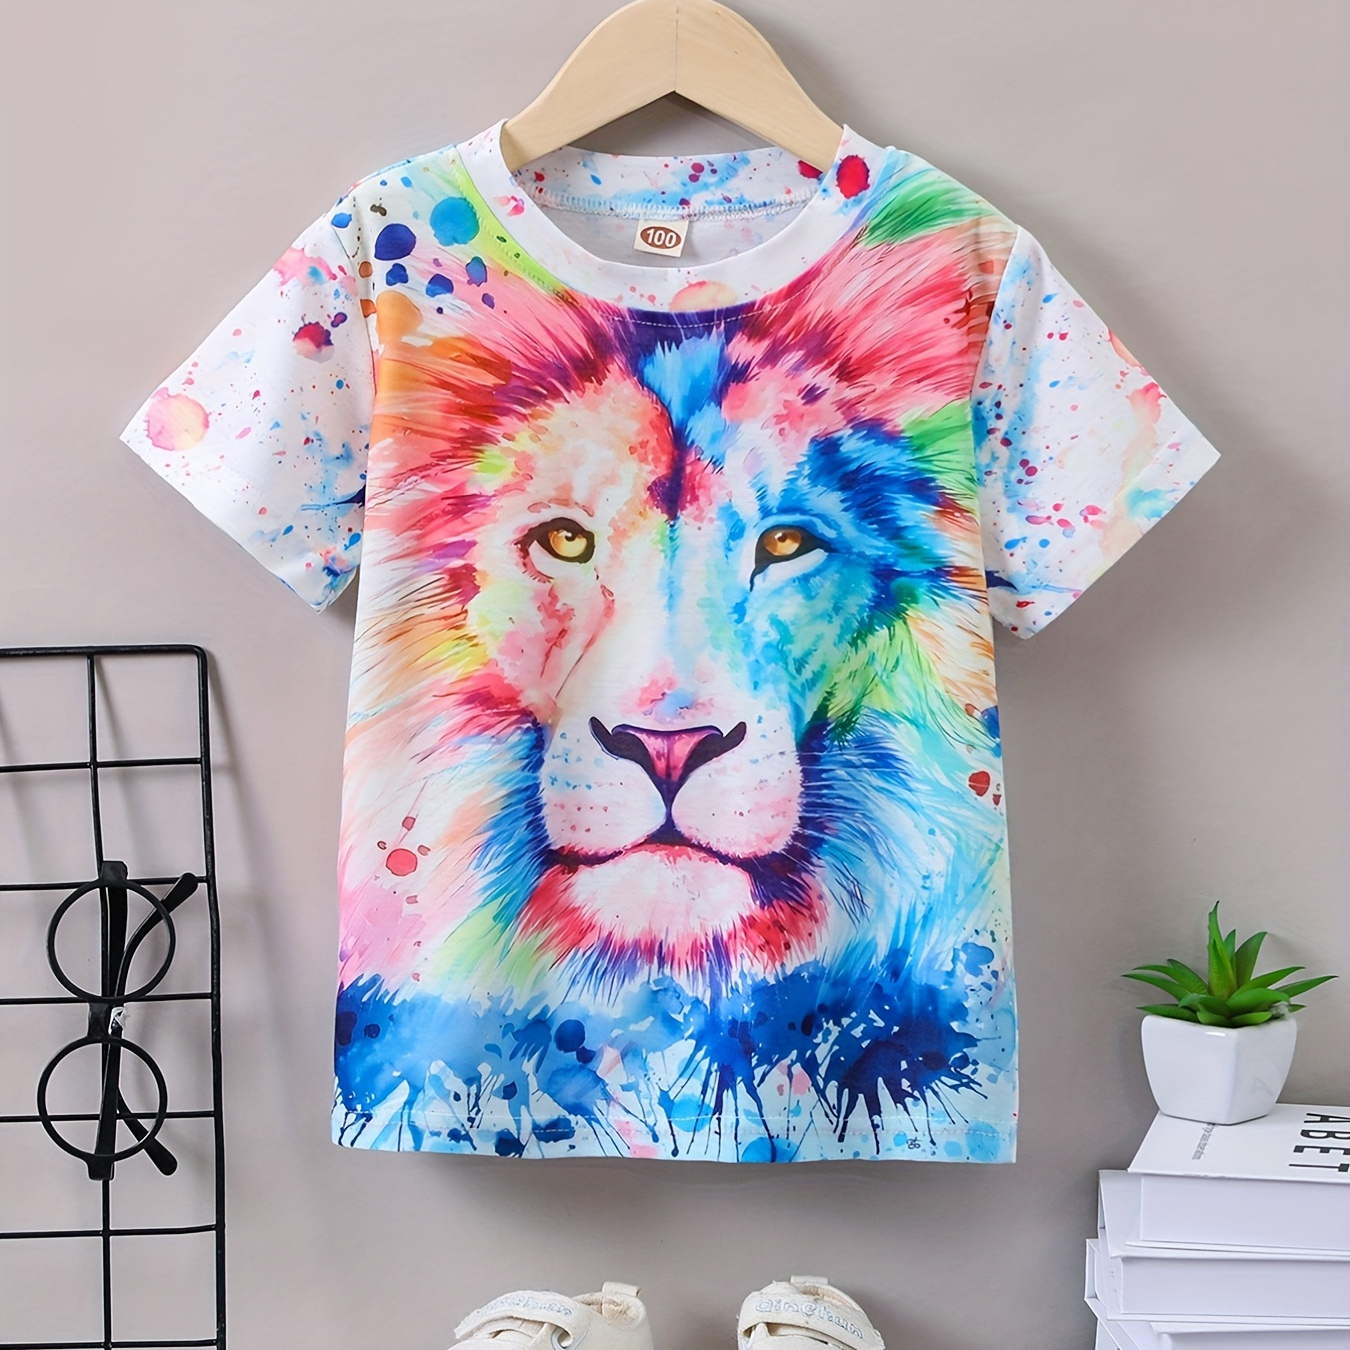 

Lion Graphic Round Neck T-shirt Tees Tops Casual Soft Comfortable, Boys And Girls Summer Clothes